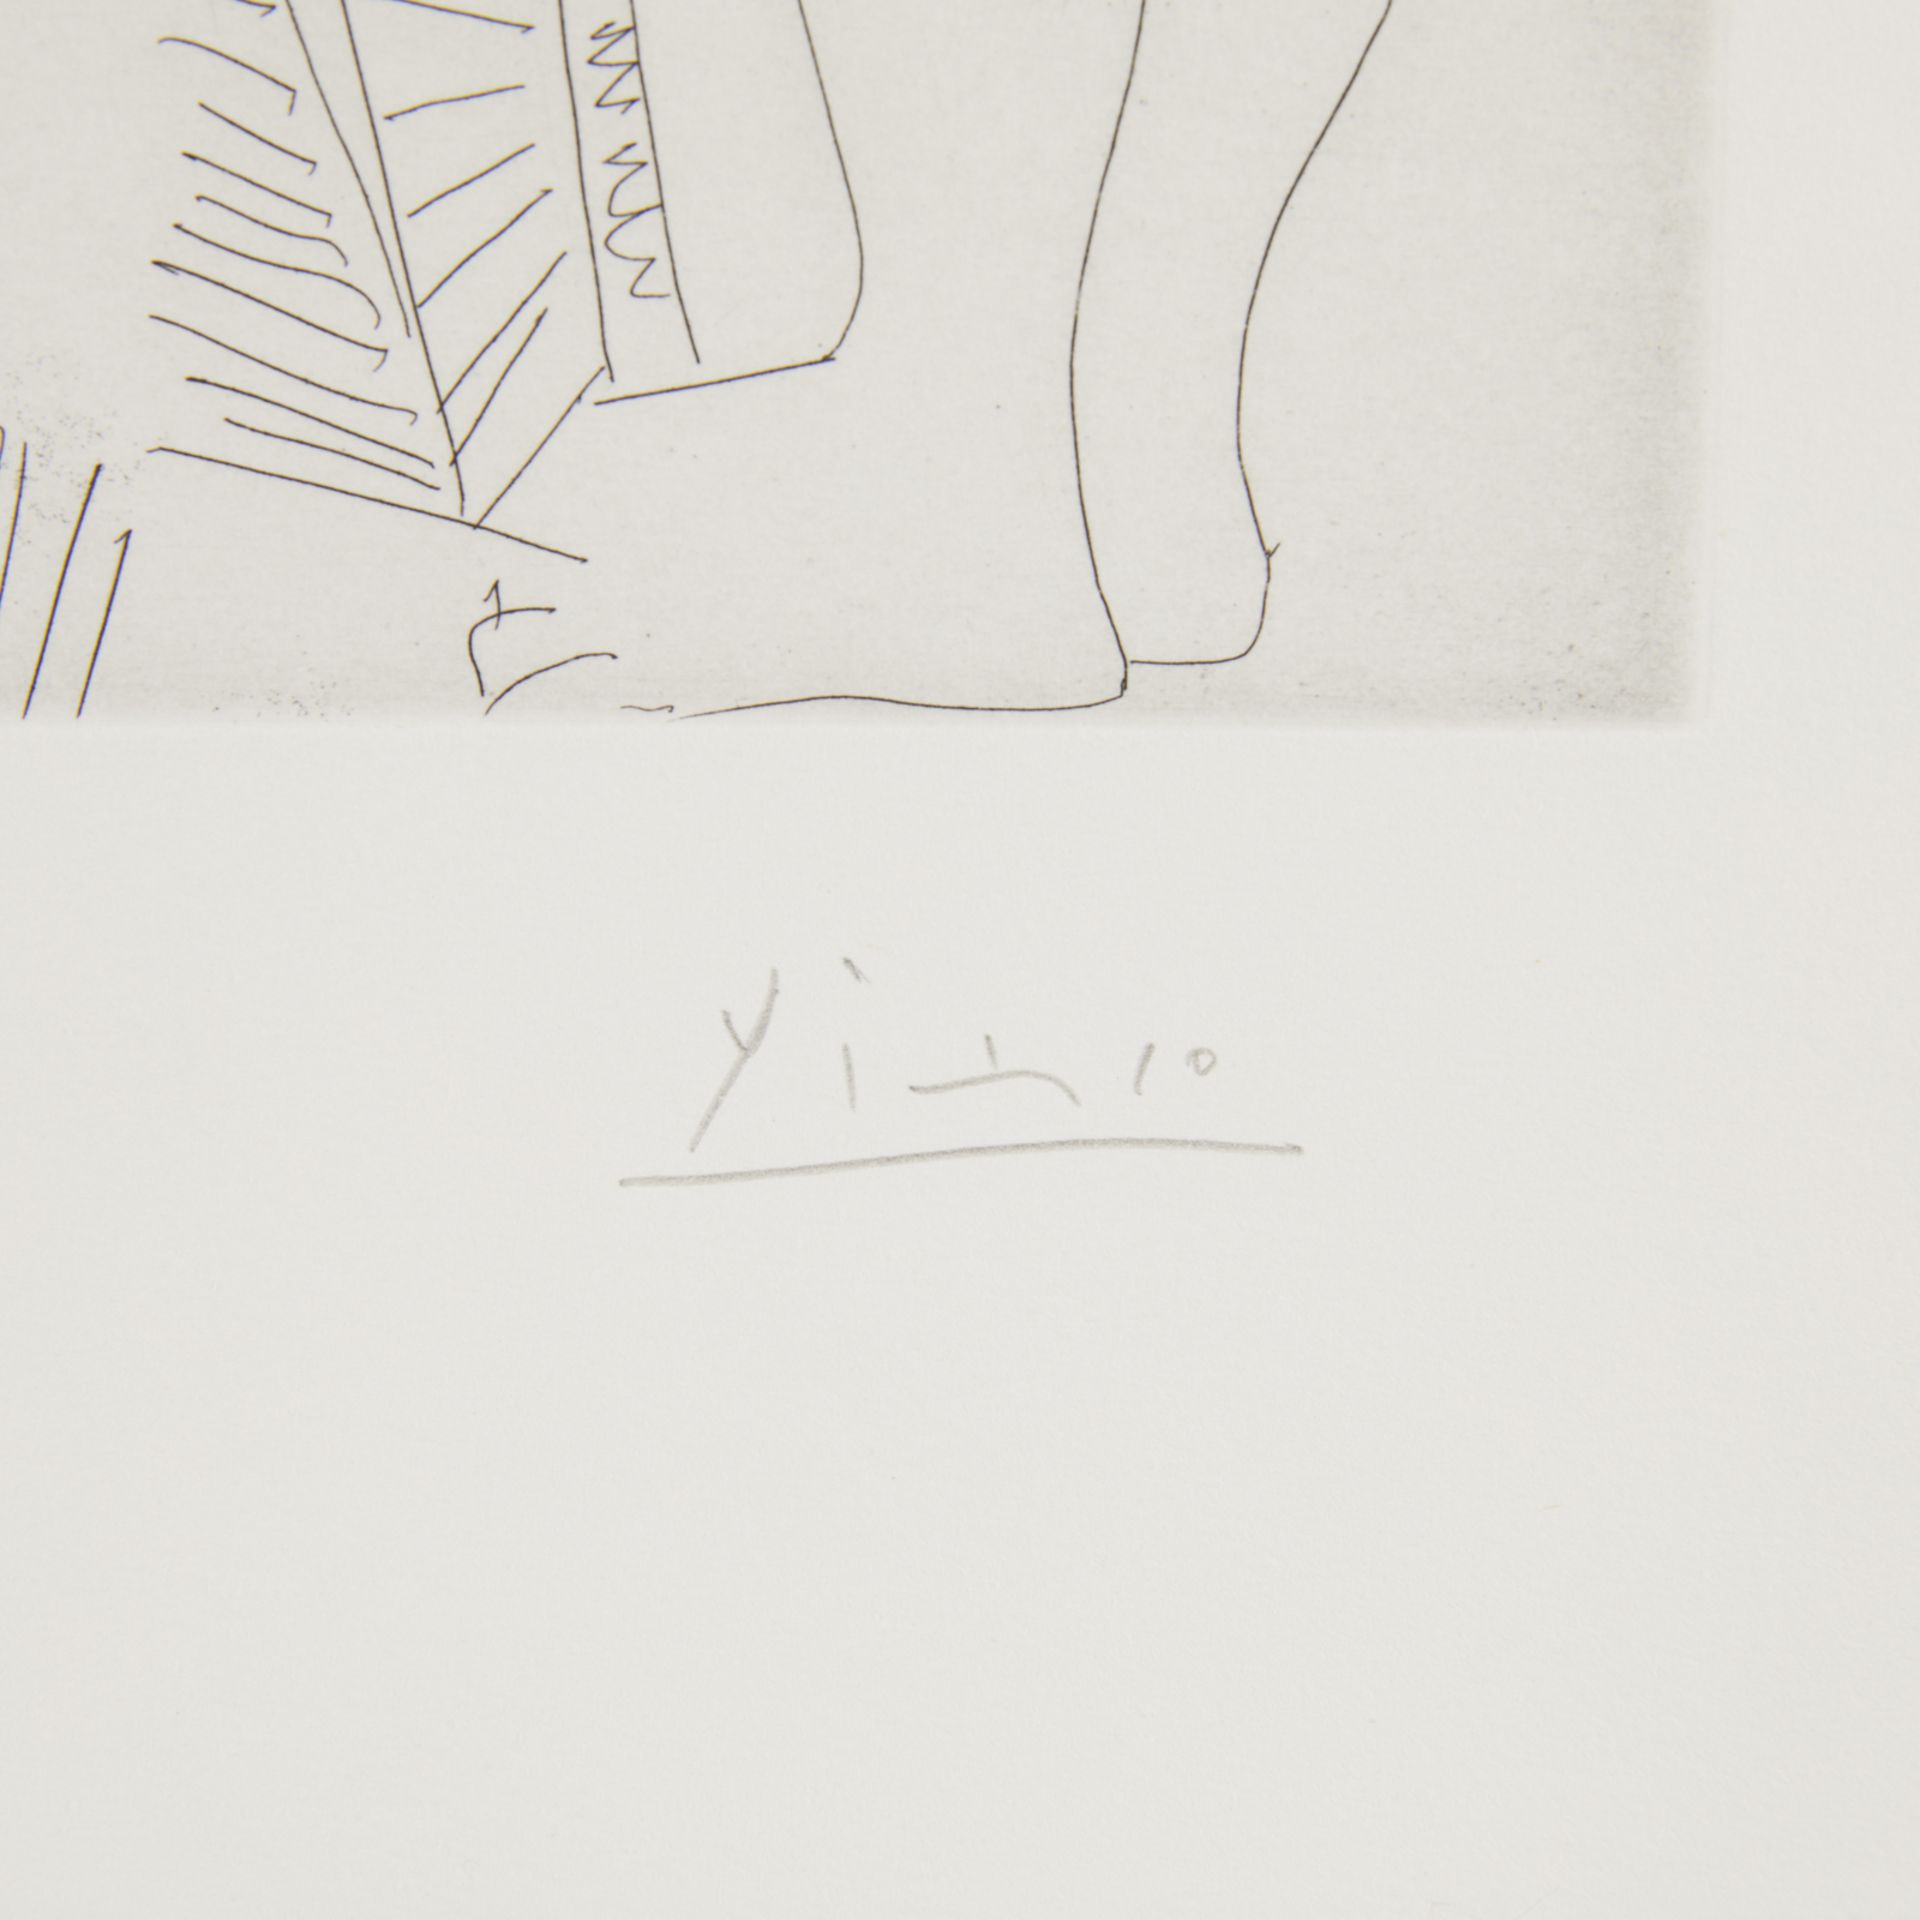 Picasso "L'Atelier" Etching 347 Series - Image 2 of 7